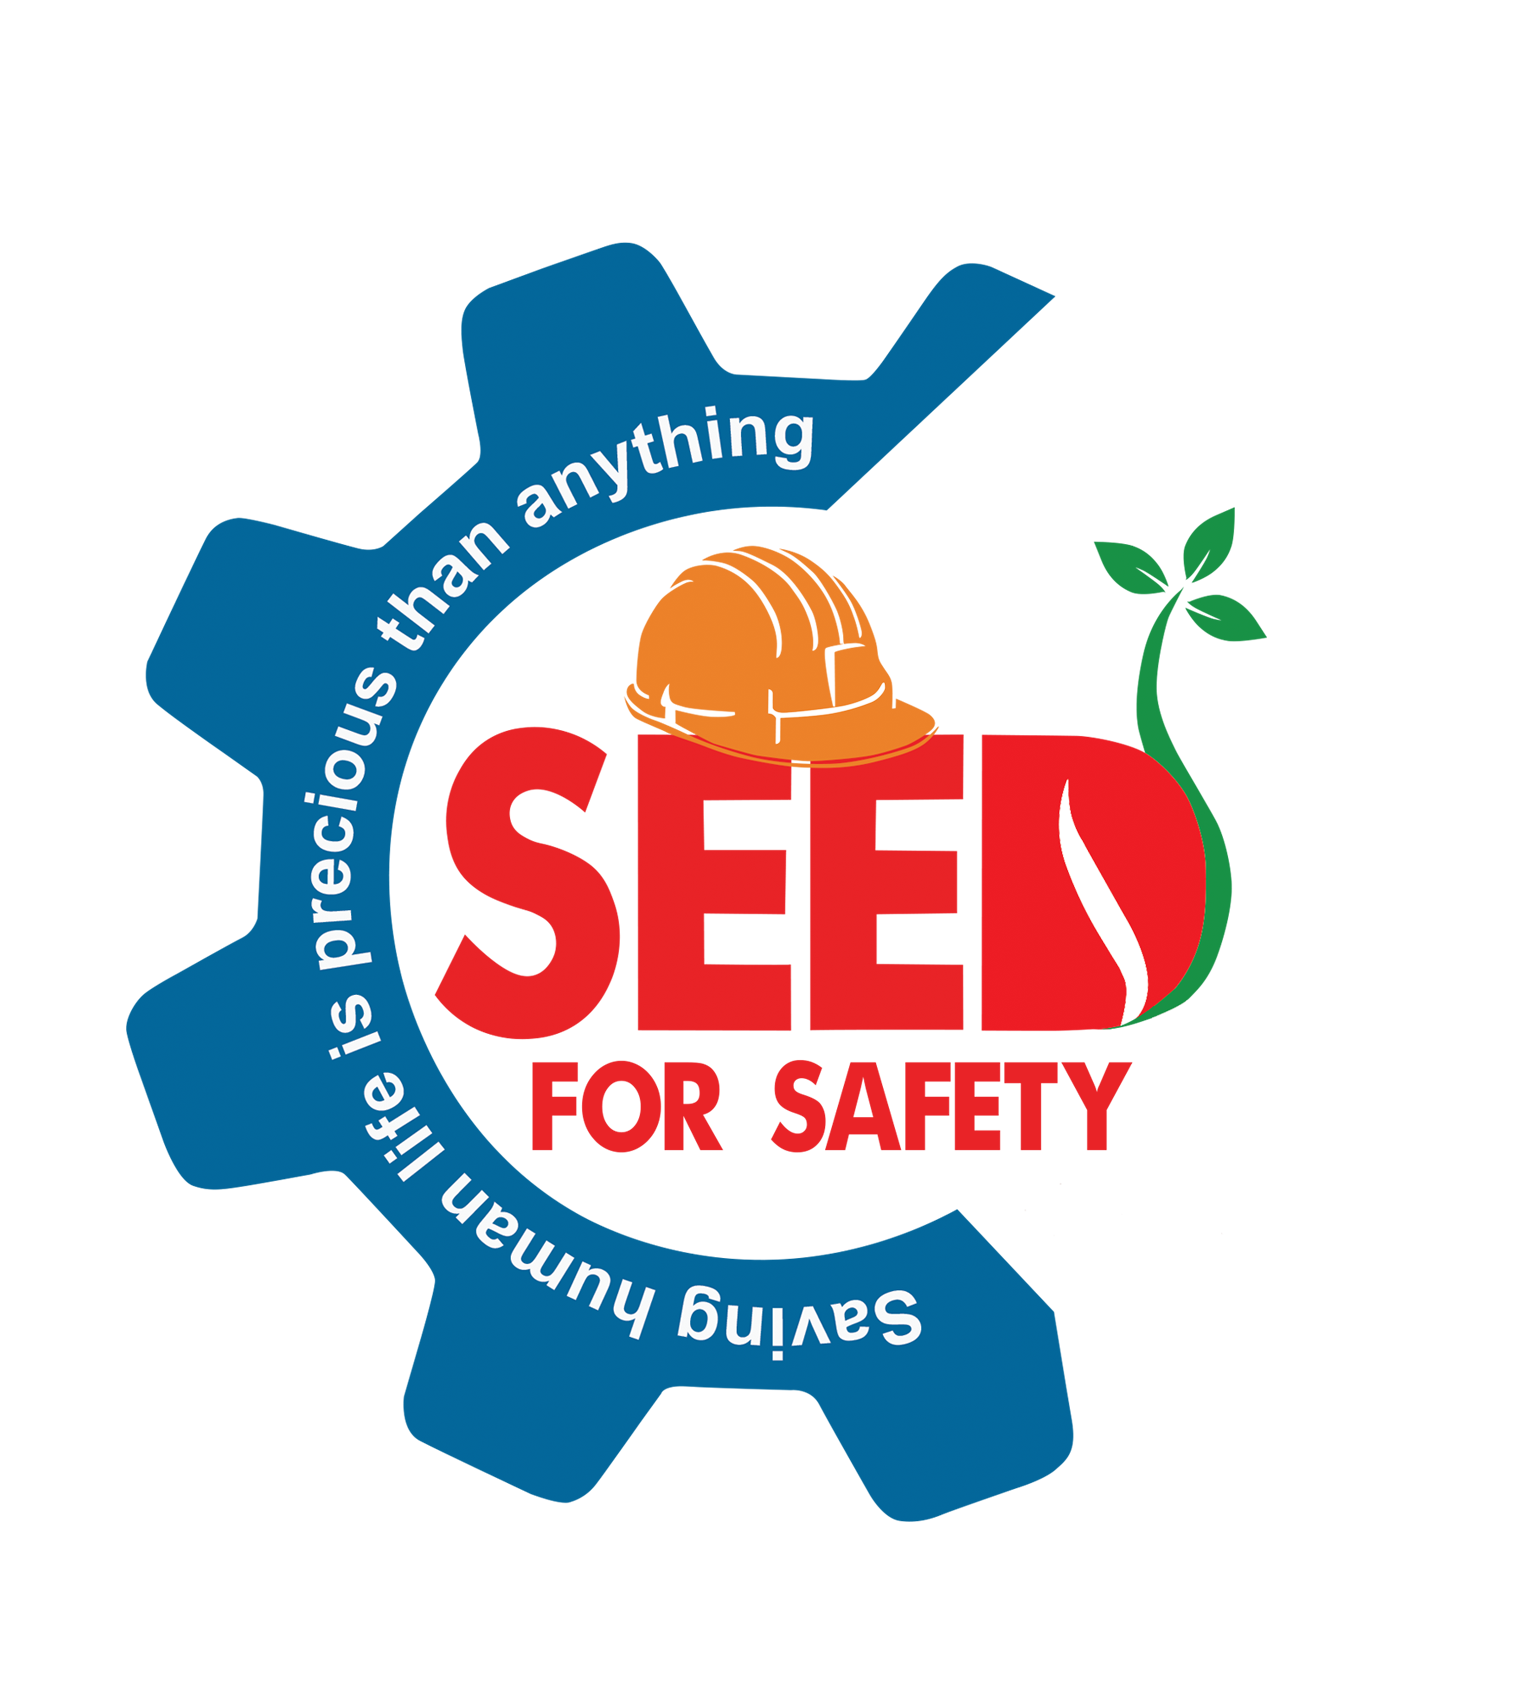 Seed for Safety